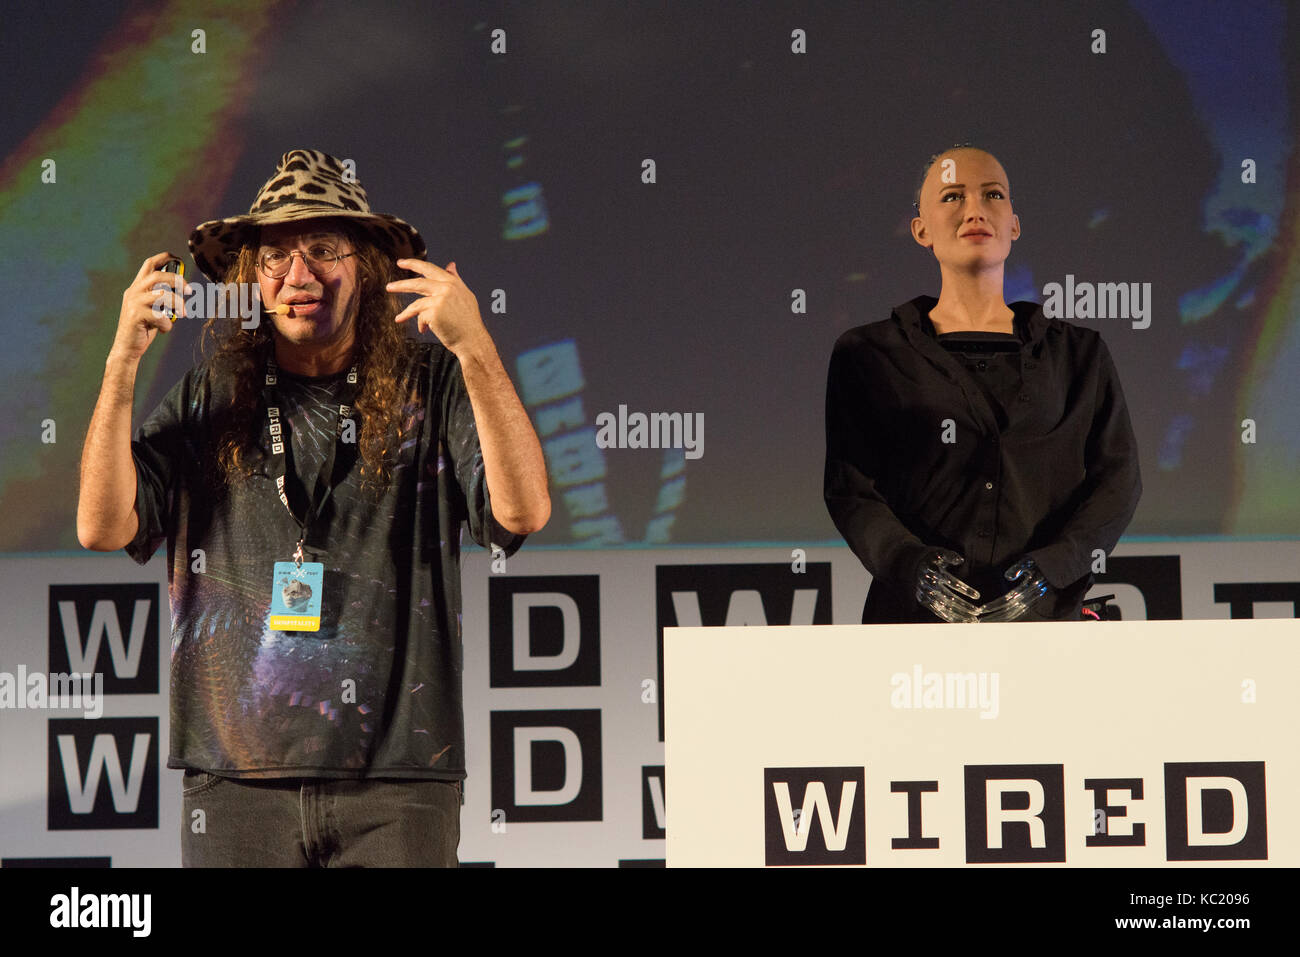 Florence, Italy. 1st October, 2017. Wired Next Fest in Florence, Italy. For the first time, the protagonist of a Wired Next Fest meeting will be an Android, Sophia, now a robot citizen. Wired and Ben Goertzel, SingularityNET CEO, will interview the humanoid robot: With a female face that resembles the image of Audrey Hepburn, Sophia is able to speak naturally with facial expressions that follow her speeches. Credit: Mario Carovani/Alamy Live News Stock Photo